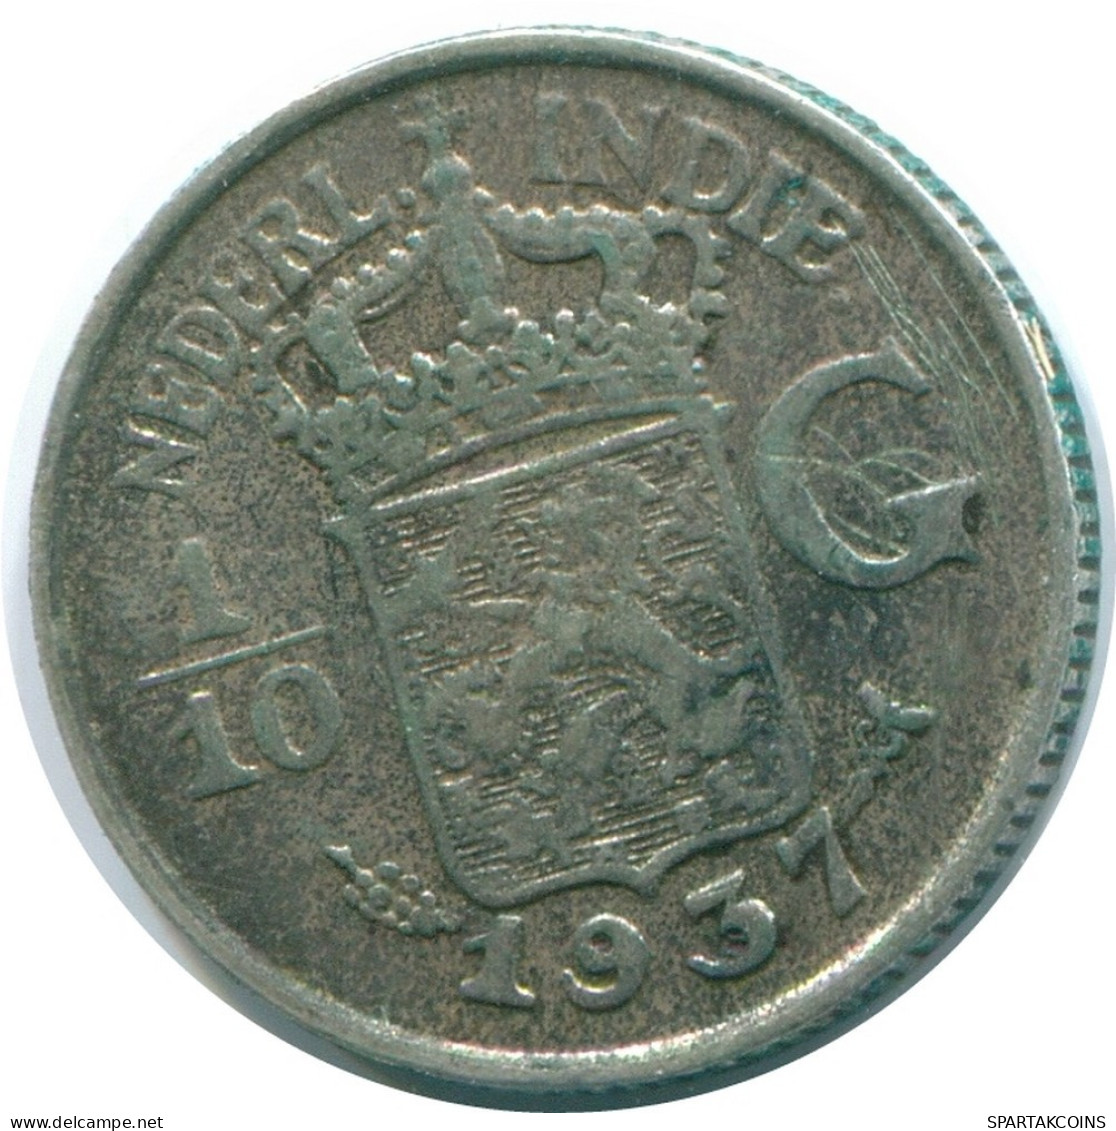 1/10 GULDEN 1937 NETHERLANDS EAST INDIES SILVER Colonial Coin #NL13479.3.U.A - Dutch East Indies